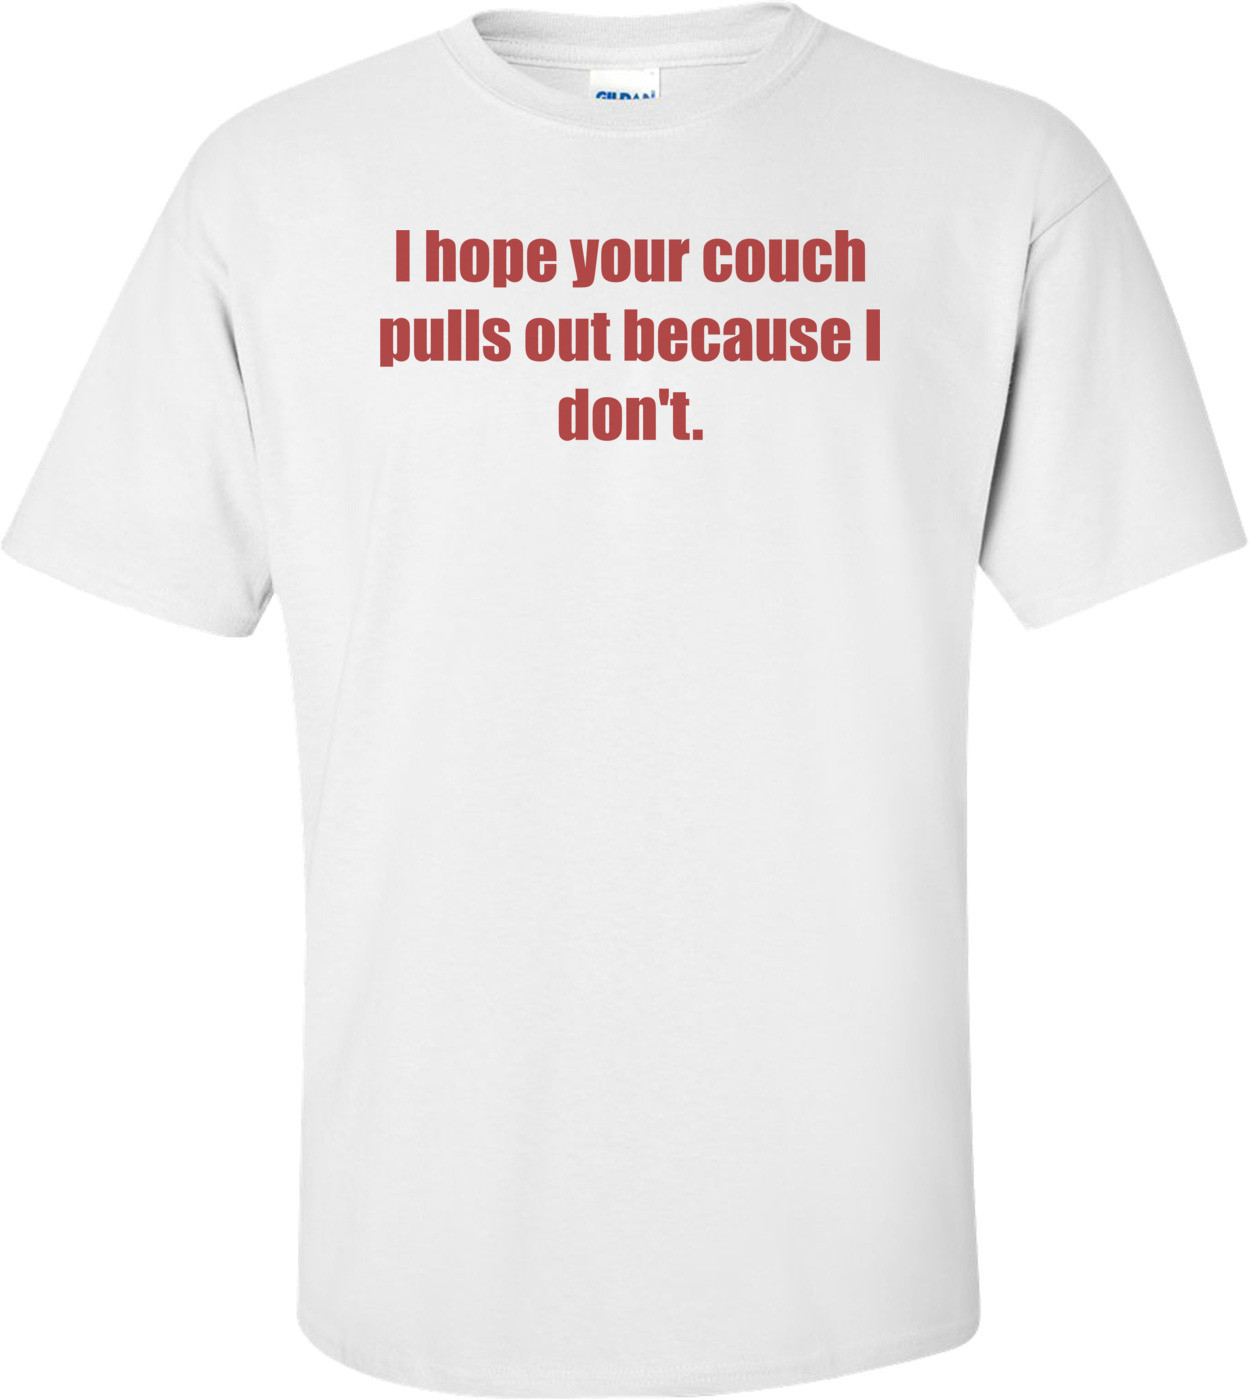 I hope your couch pulls out because I don't. Shirt